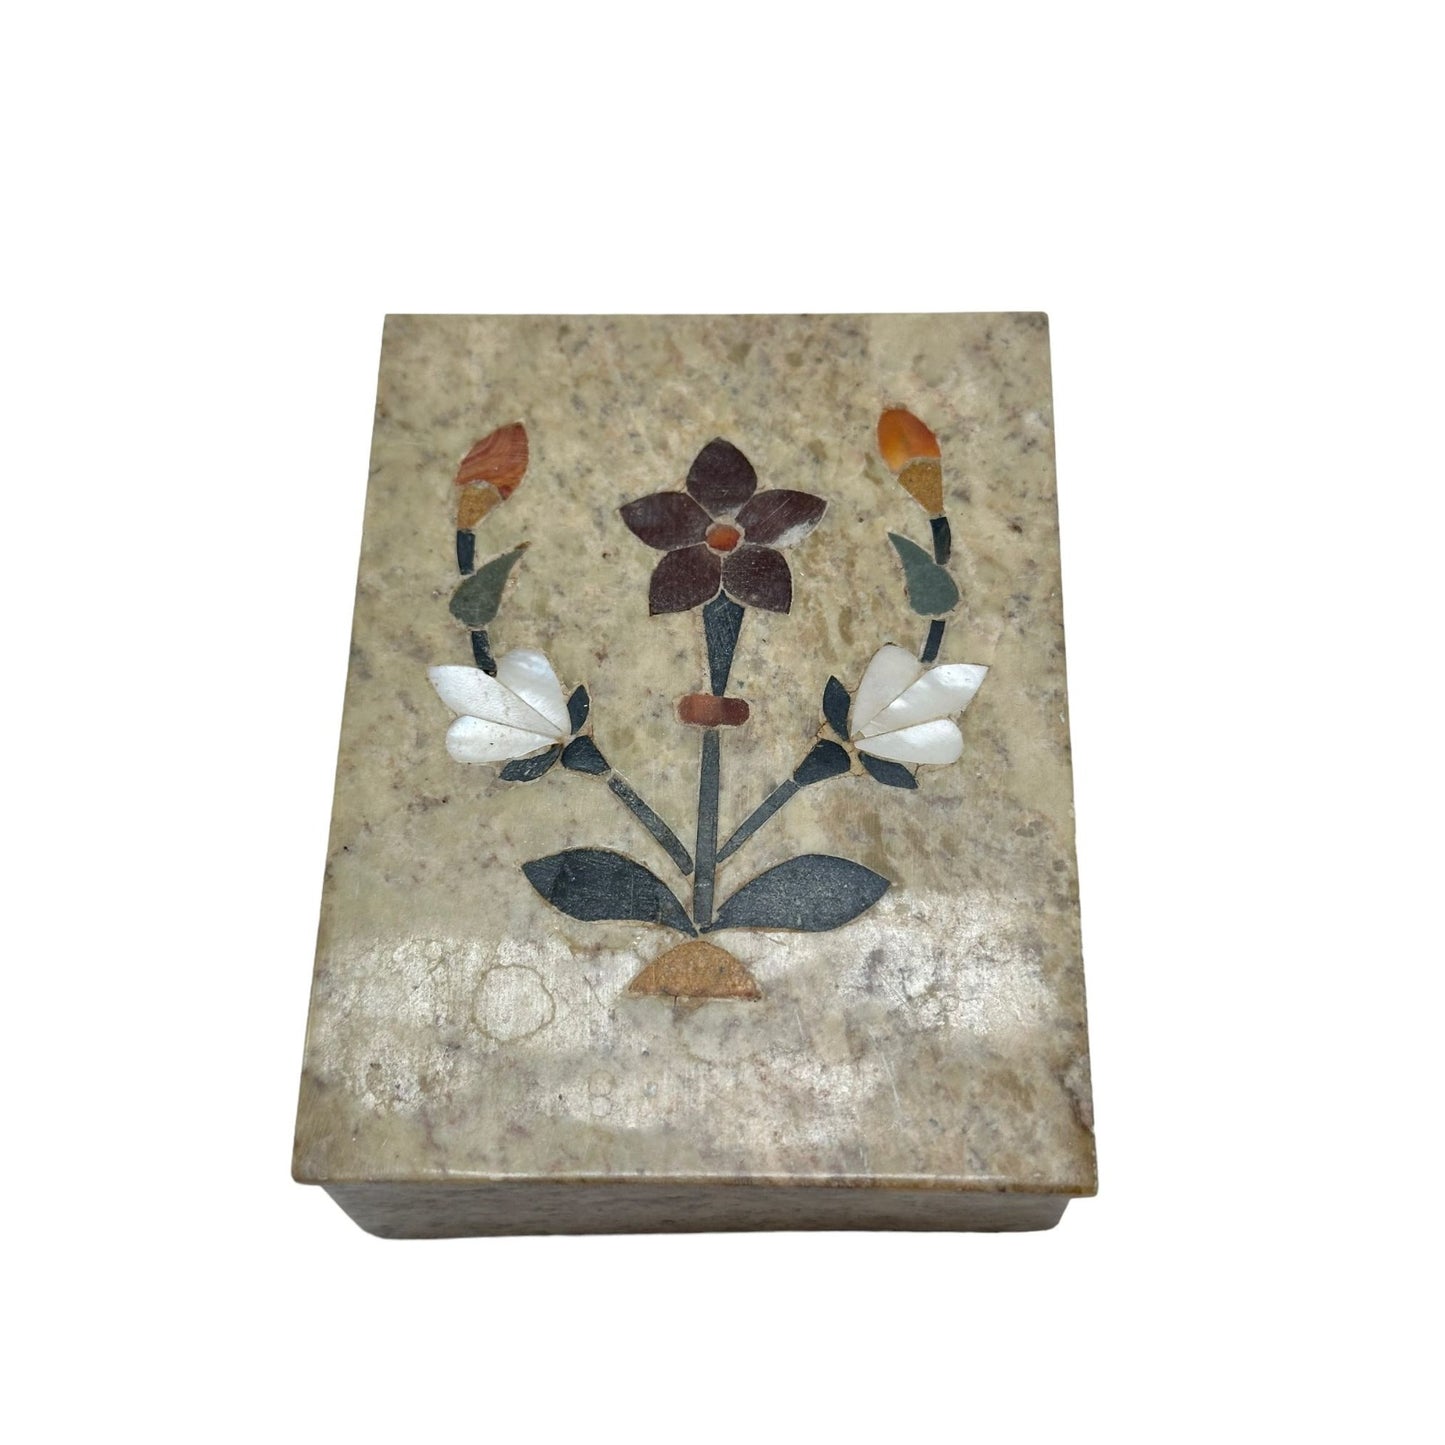 Vintage Marble Trinket Box Made in India Floral Inlay Design 3" x 4" Collectible